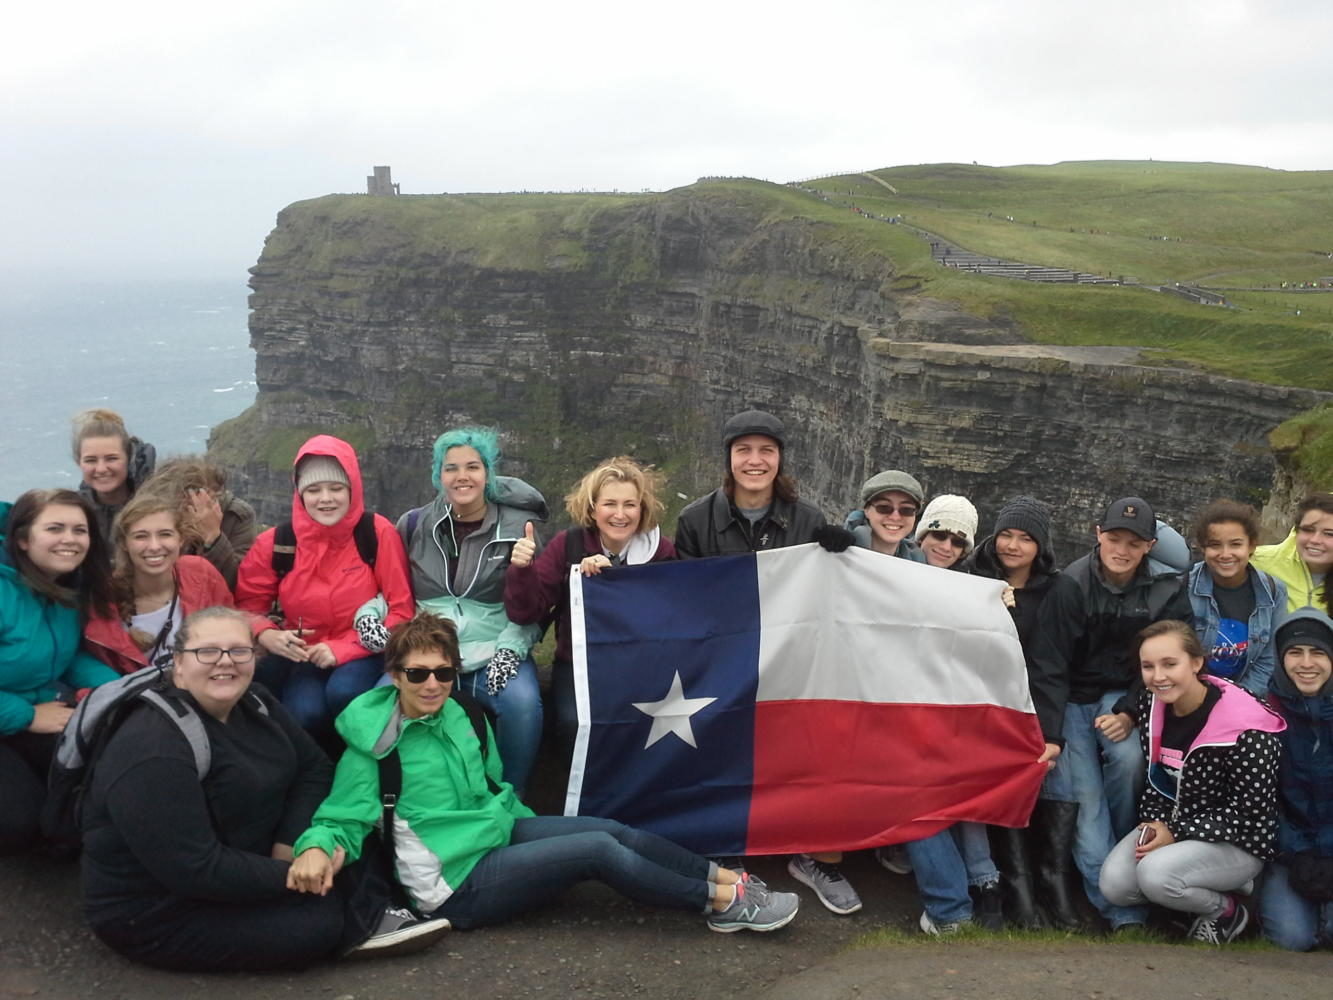 Mrs.+Weston+and+the+16+students+on+the+Cliffs+of+Moher%2C+with+a+700+foot+drop+behind+them.